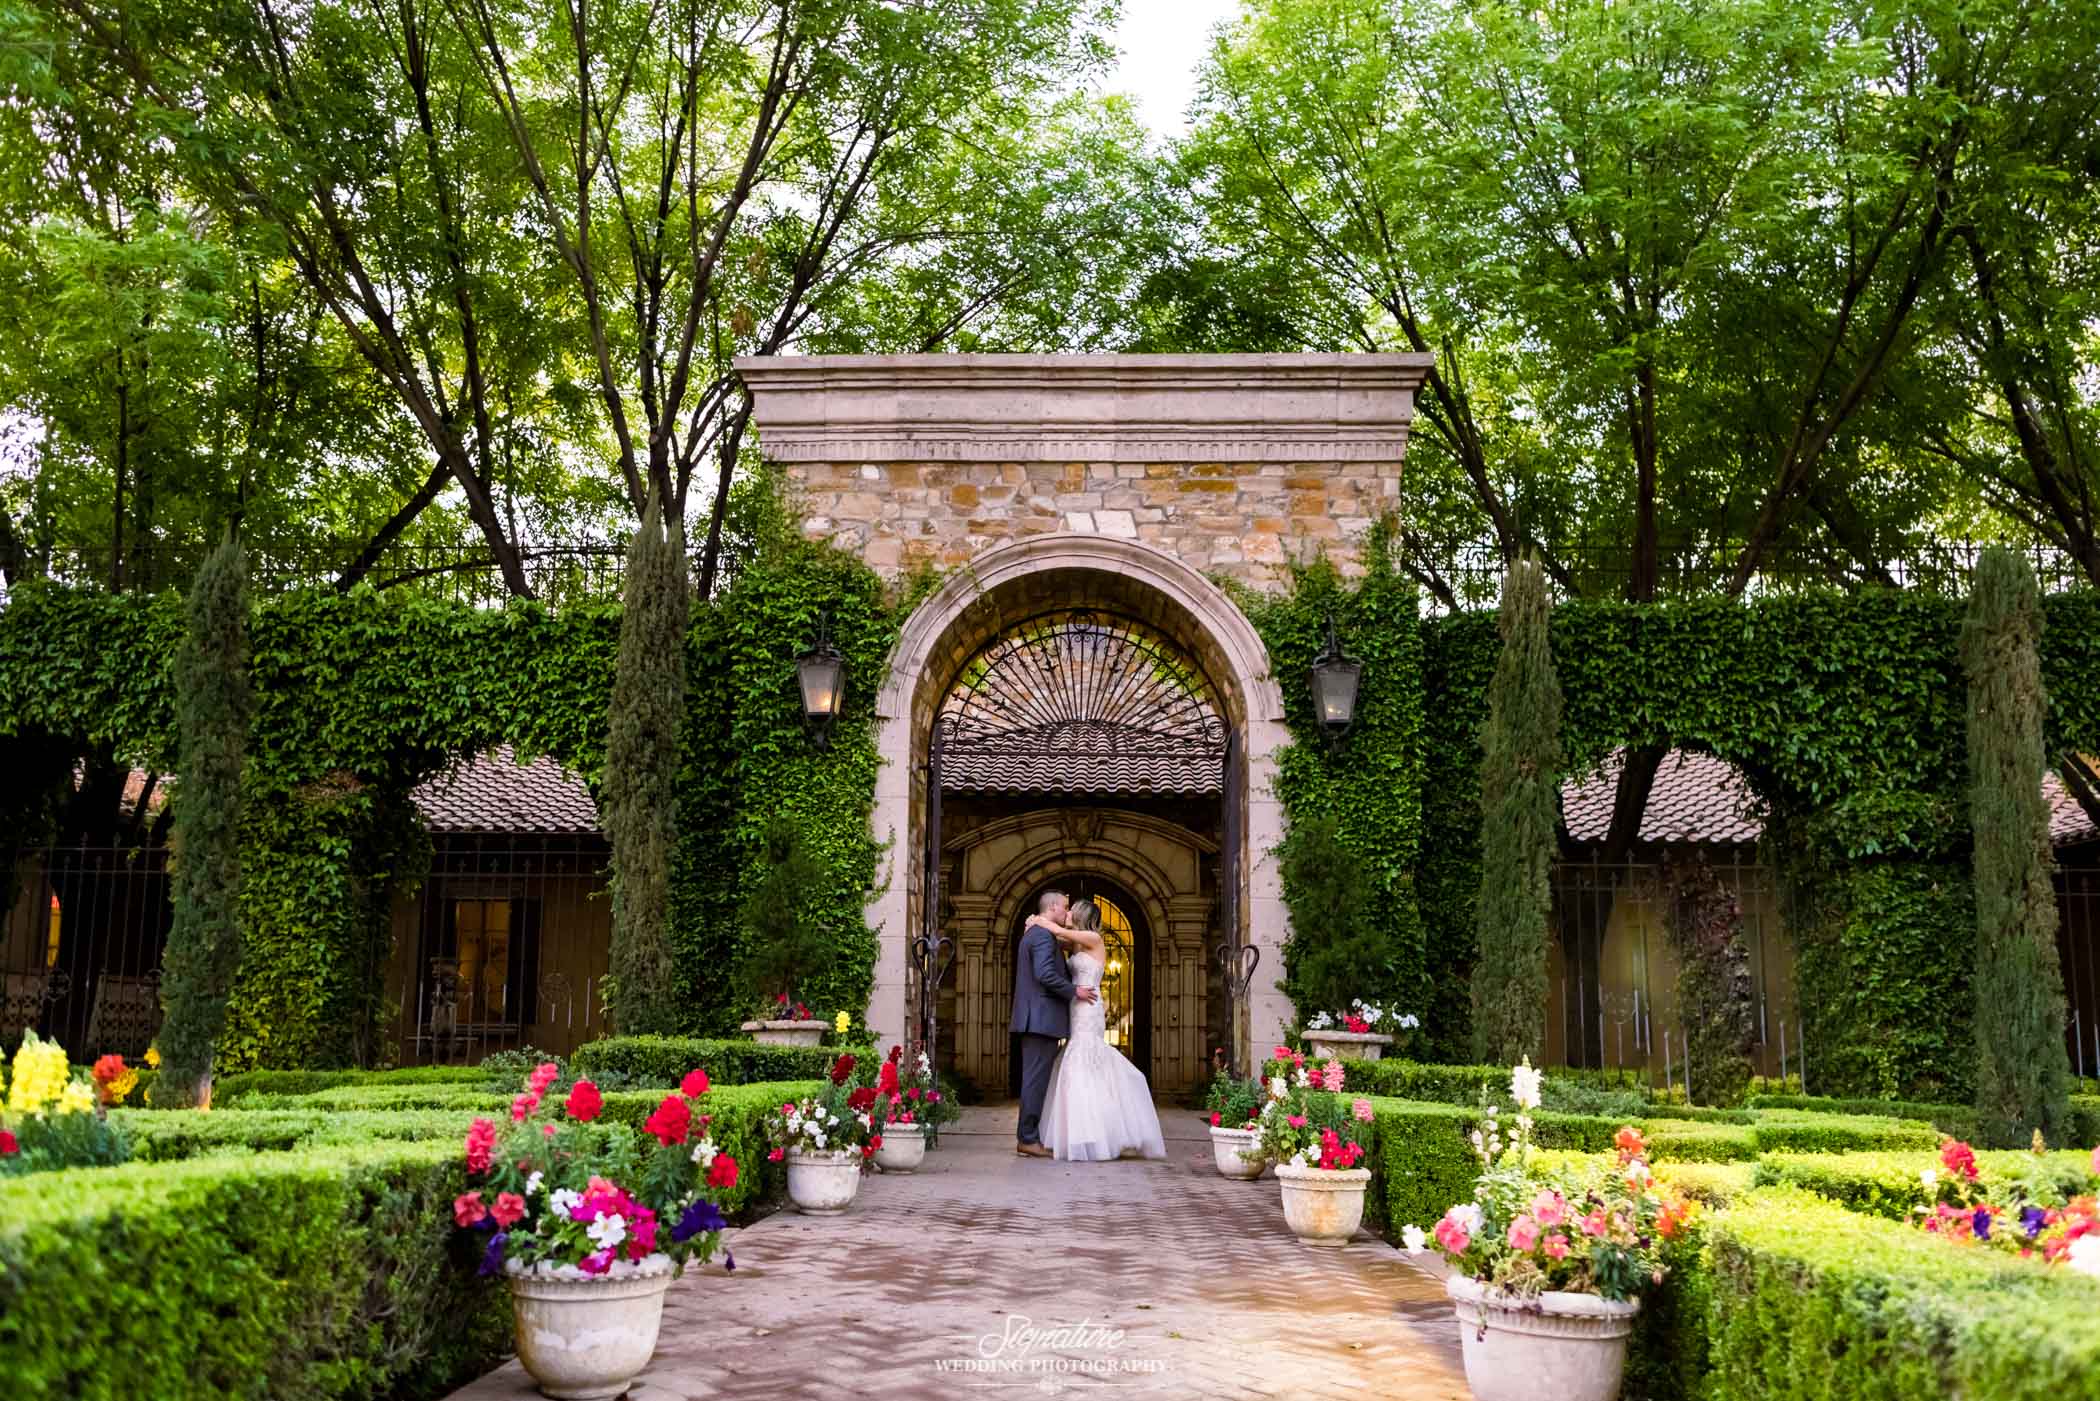 Bride and groom kissing under archway in garden